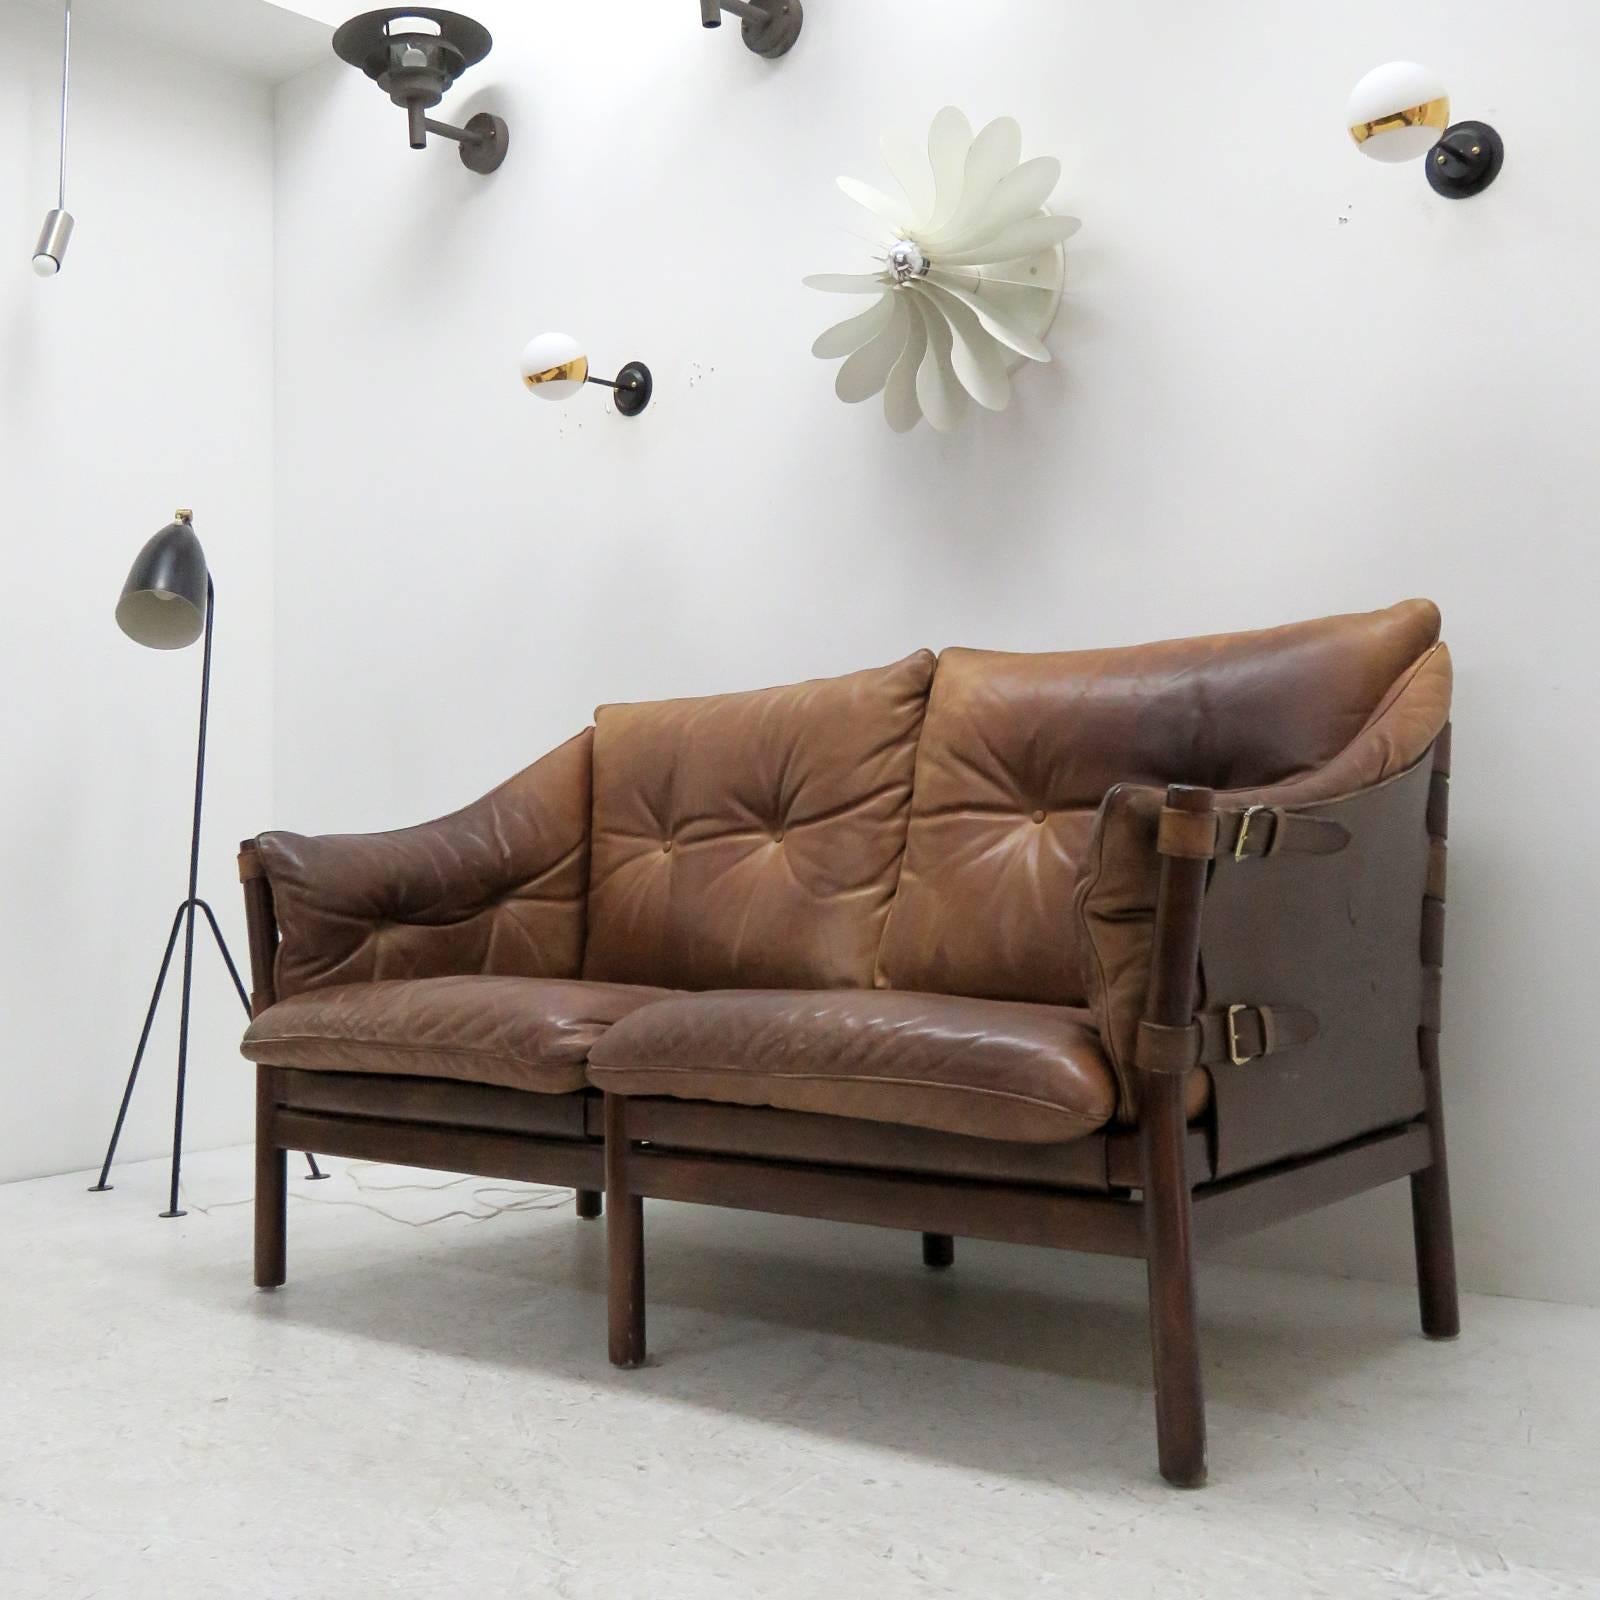 Mid-20th Century Leather Settee Model ‘Ilona’ by Arne Norell